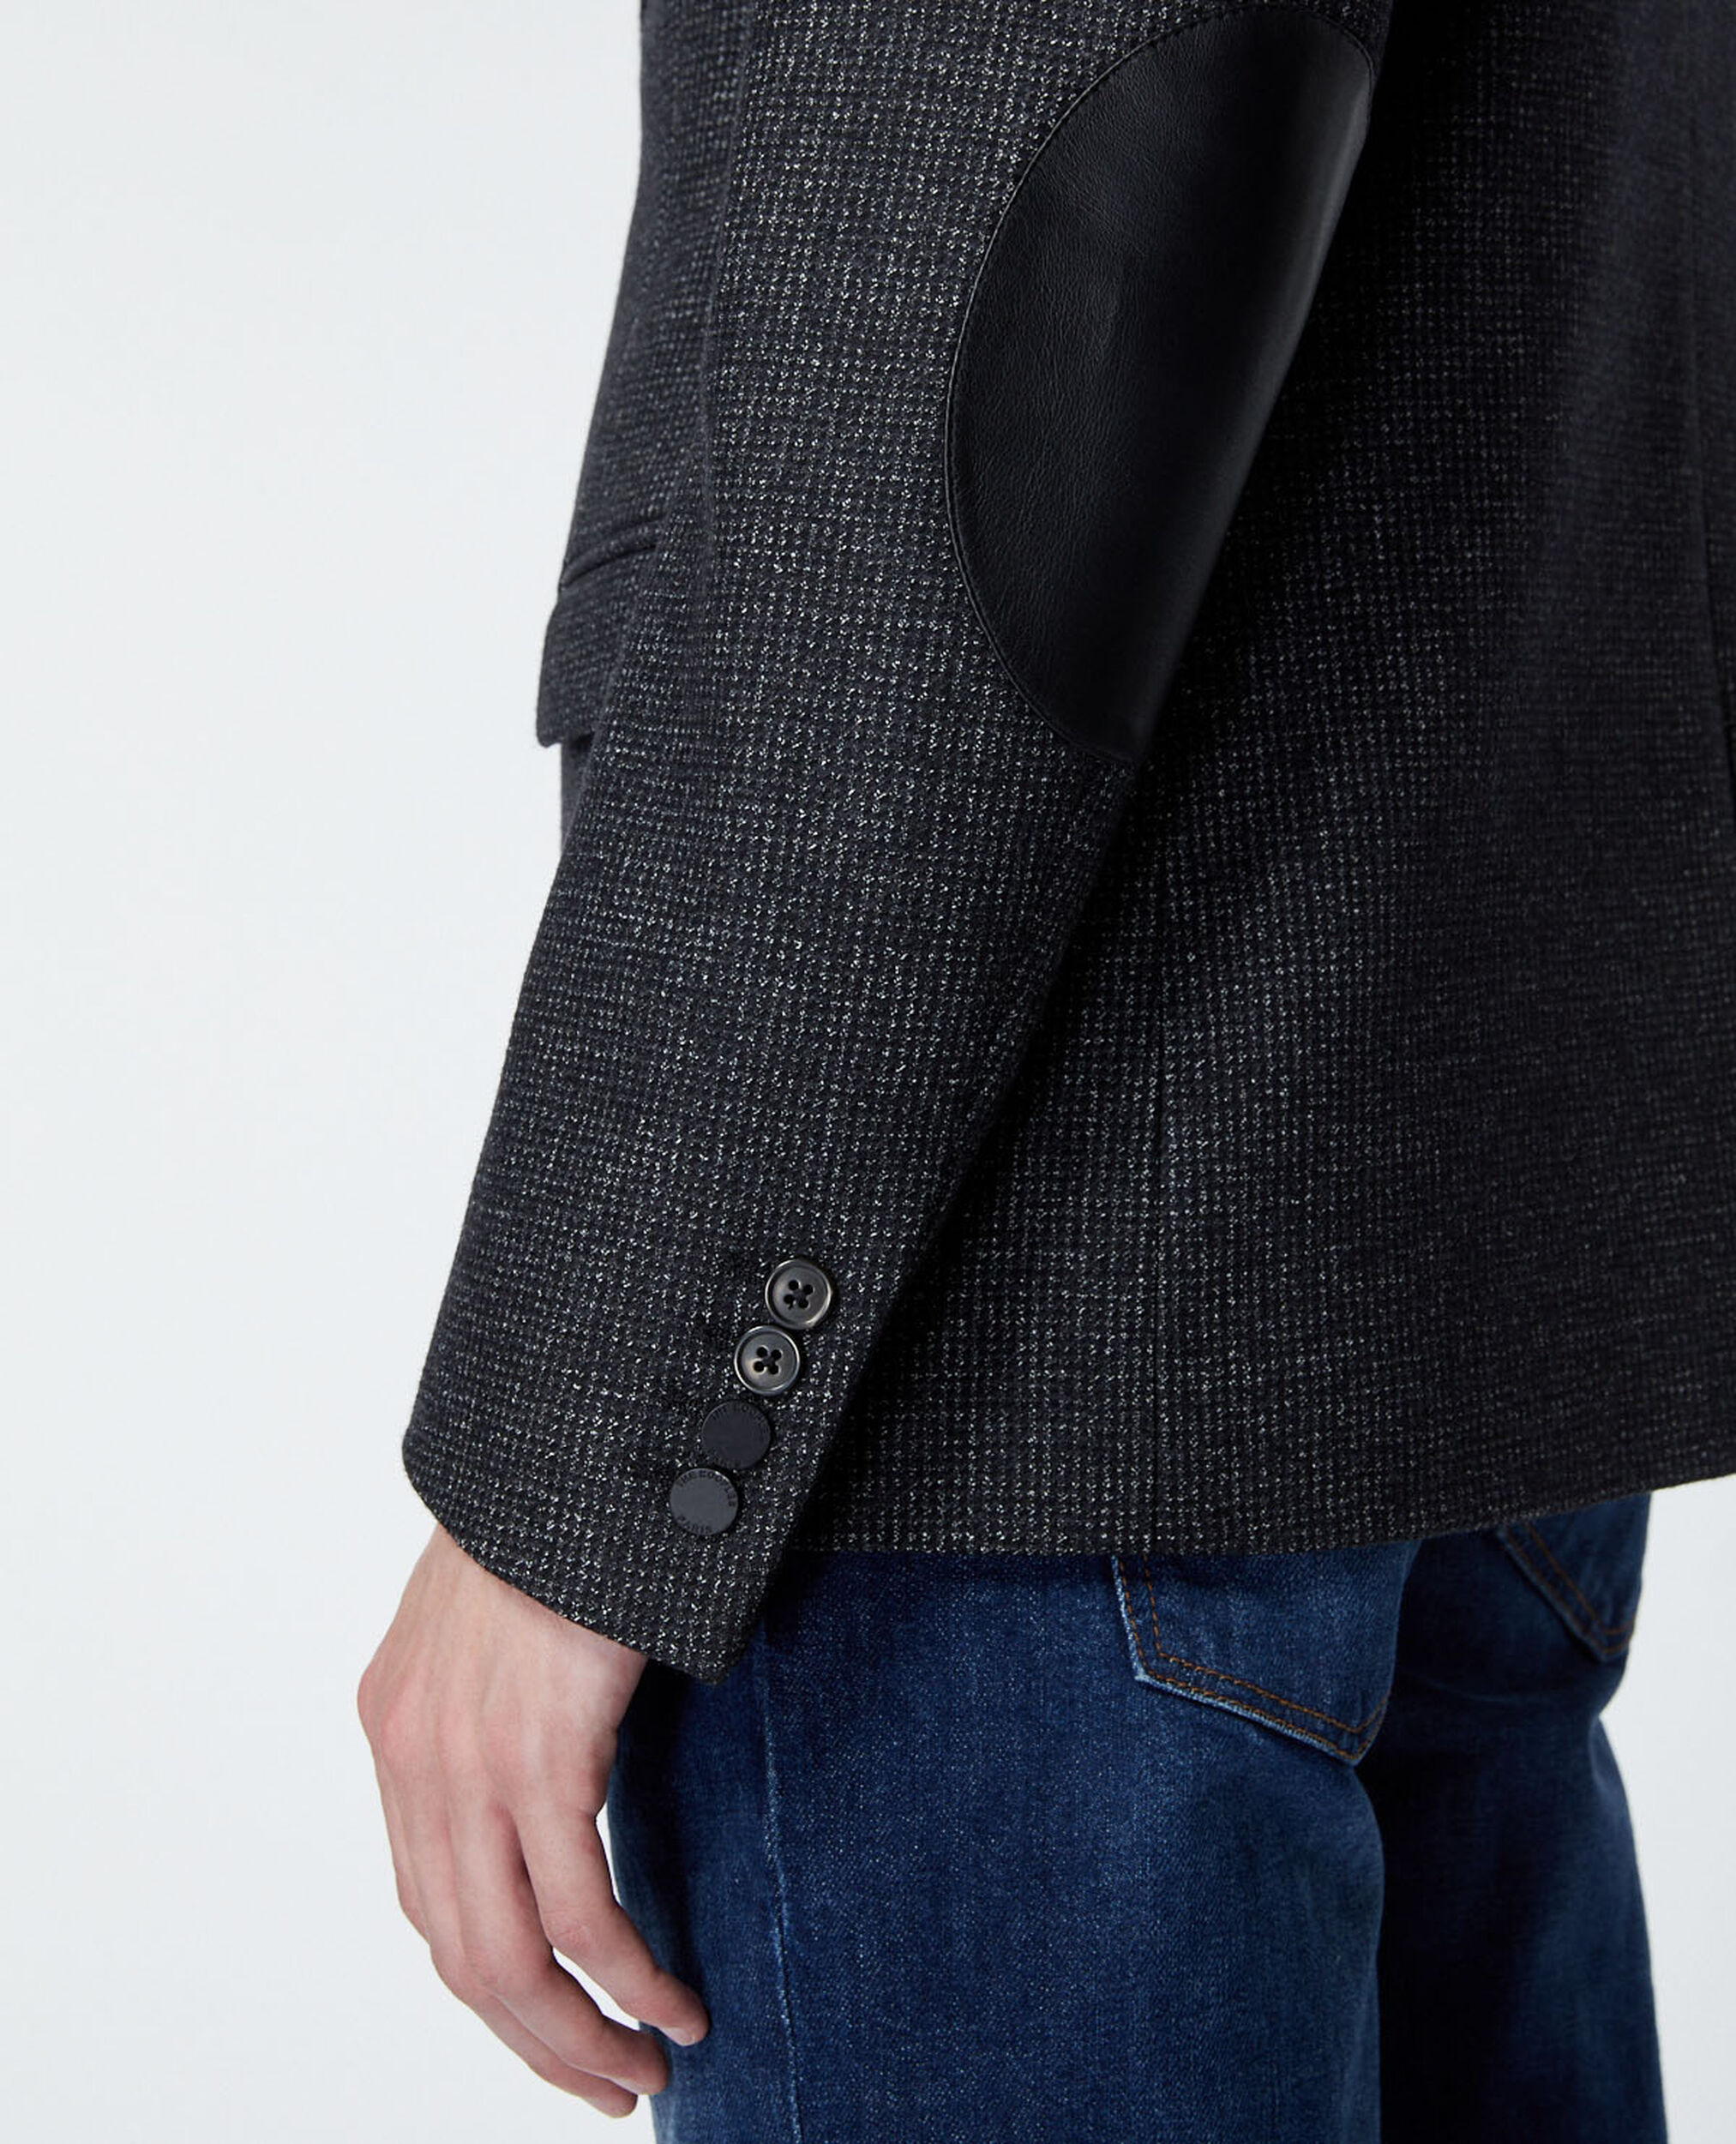 Formal black jacket in wool w/elbow patches, BLACK GREY, hi-res image number null